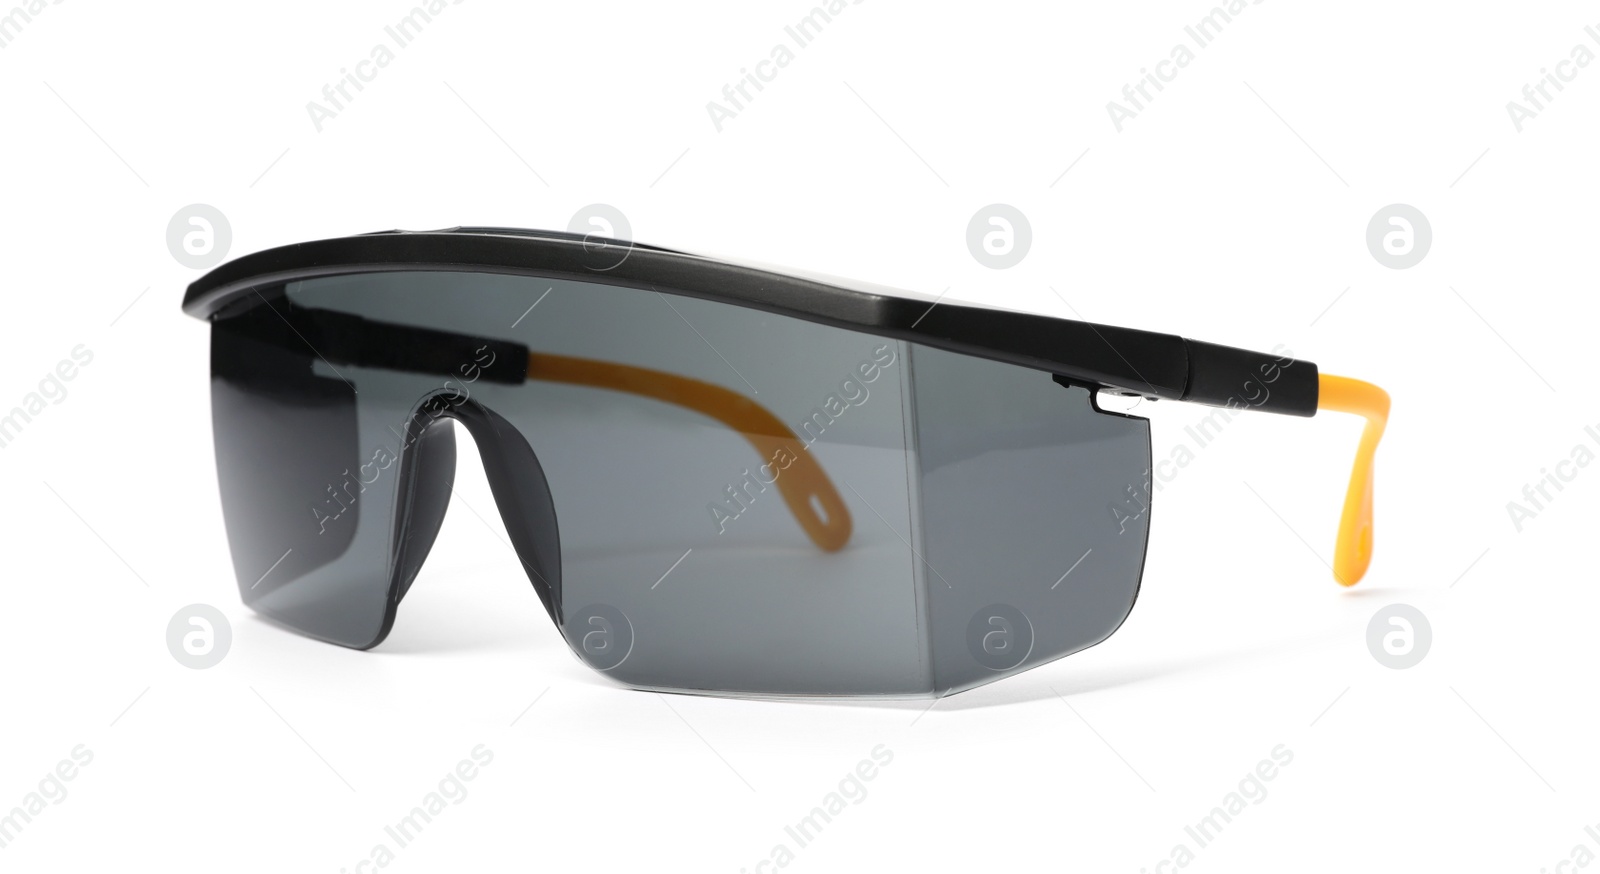 Photo of Protective goggles on white background. Construction tool